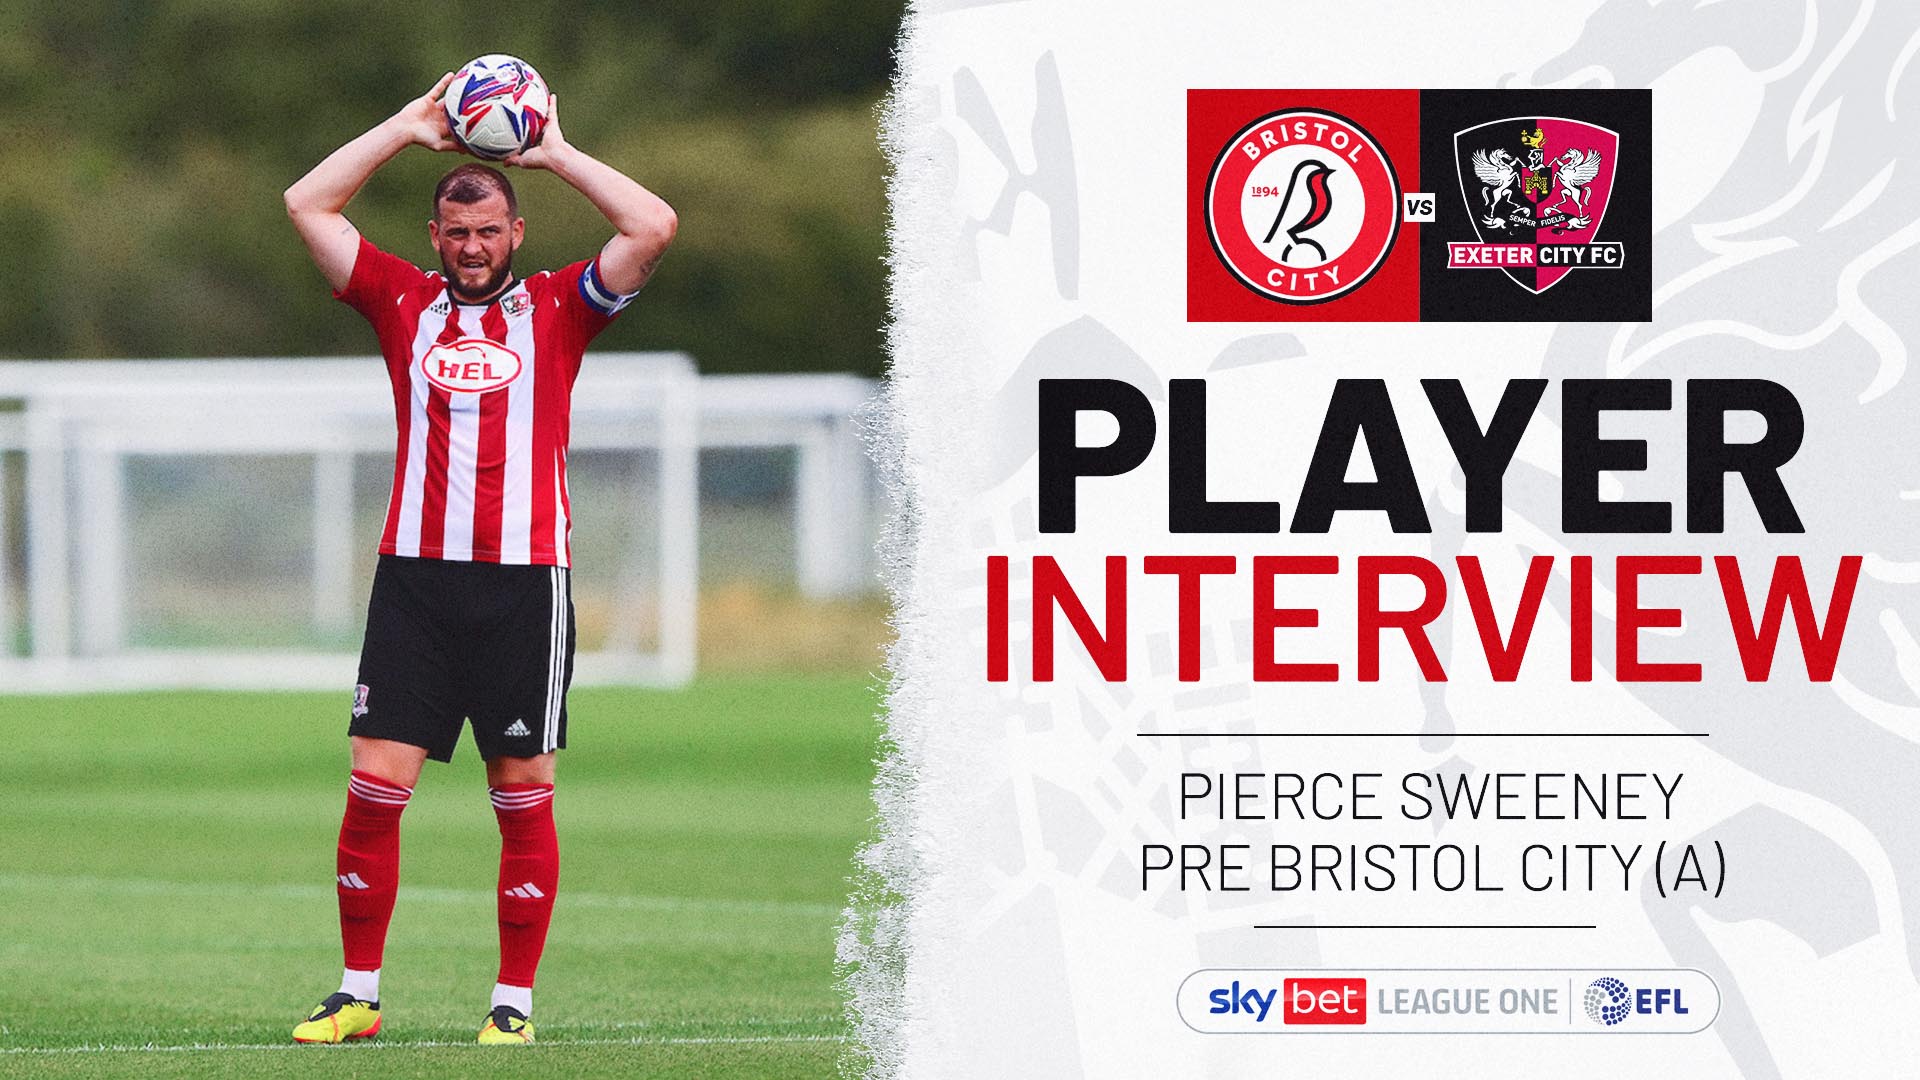 Bristol City preview with Pierce Sweeney